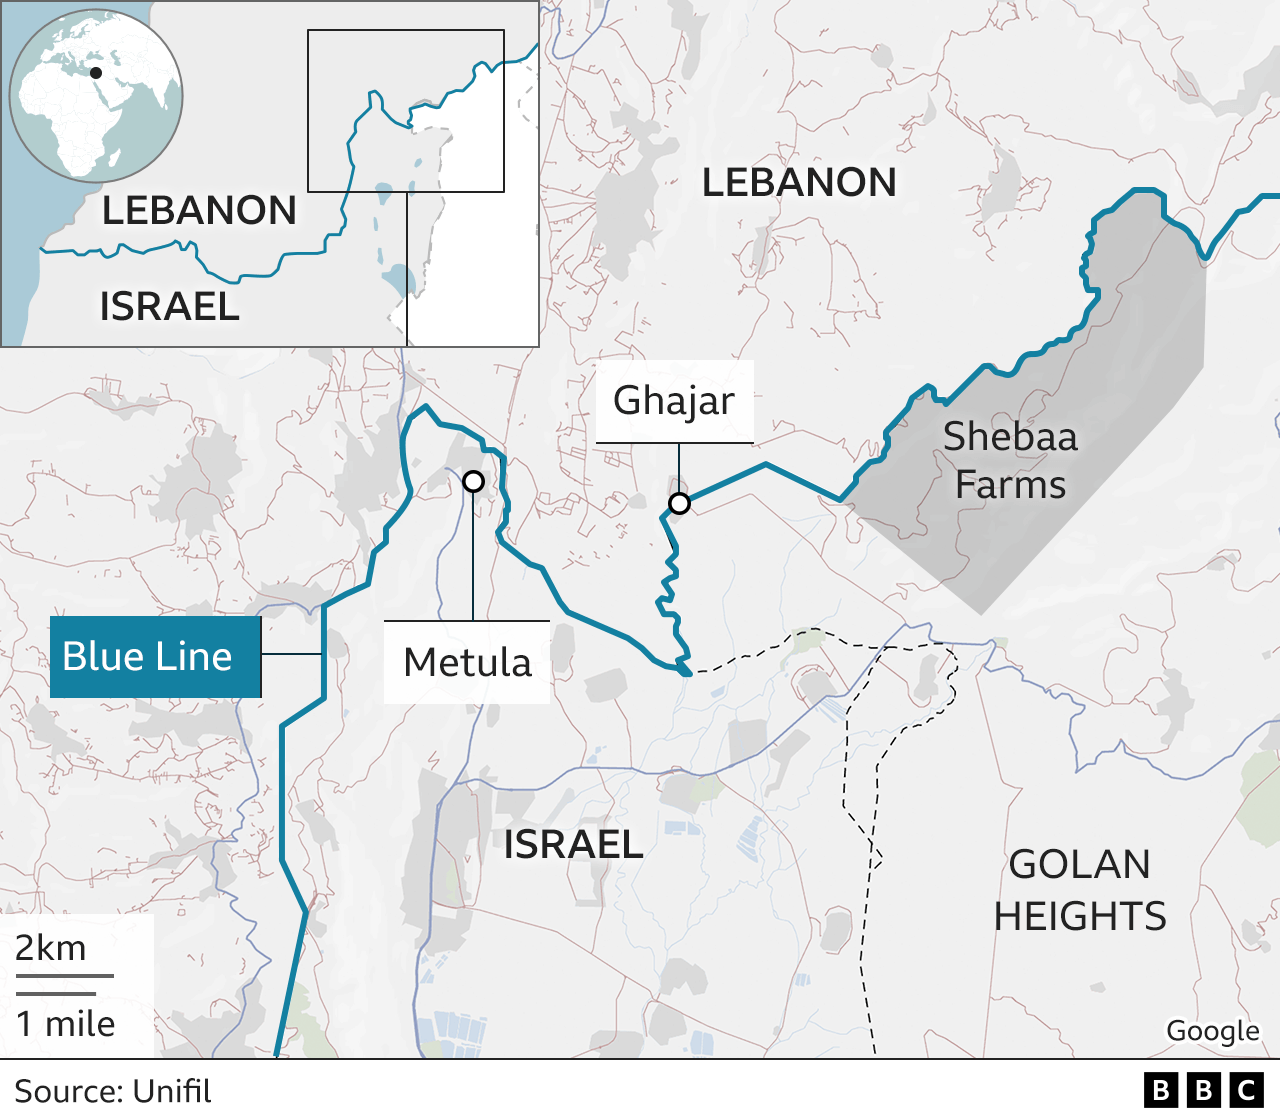 Map showing the Blue Line, Lebanon, Israel and Golan Heights